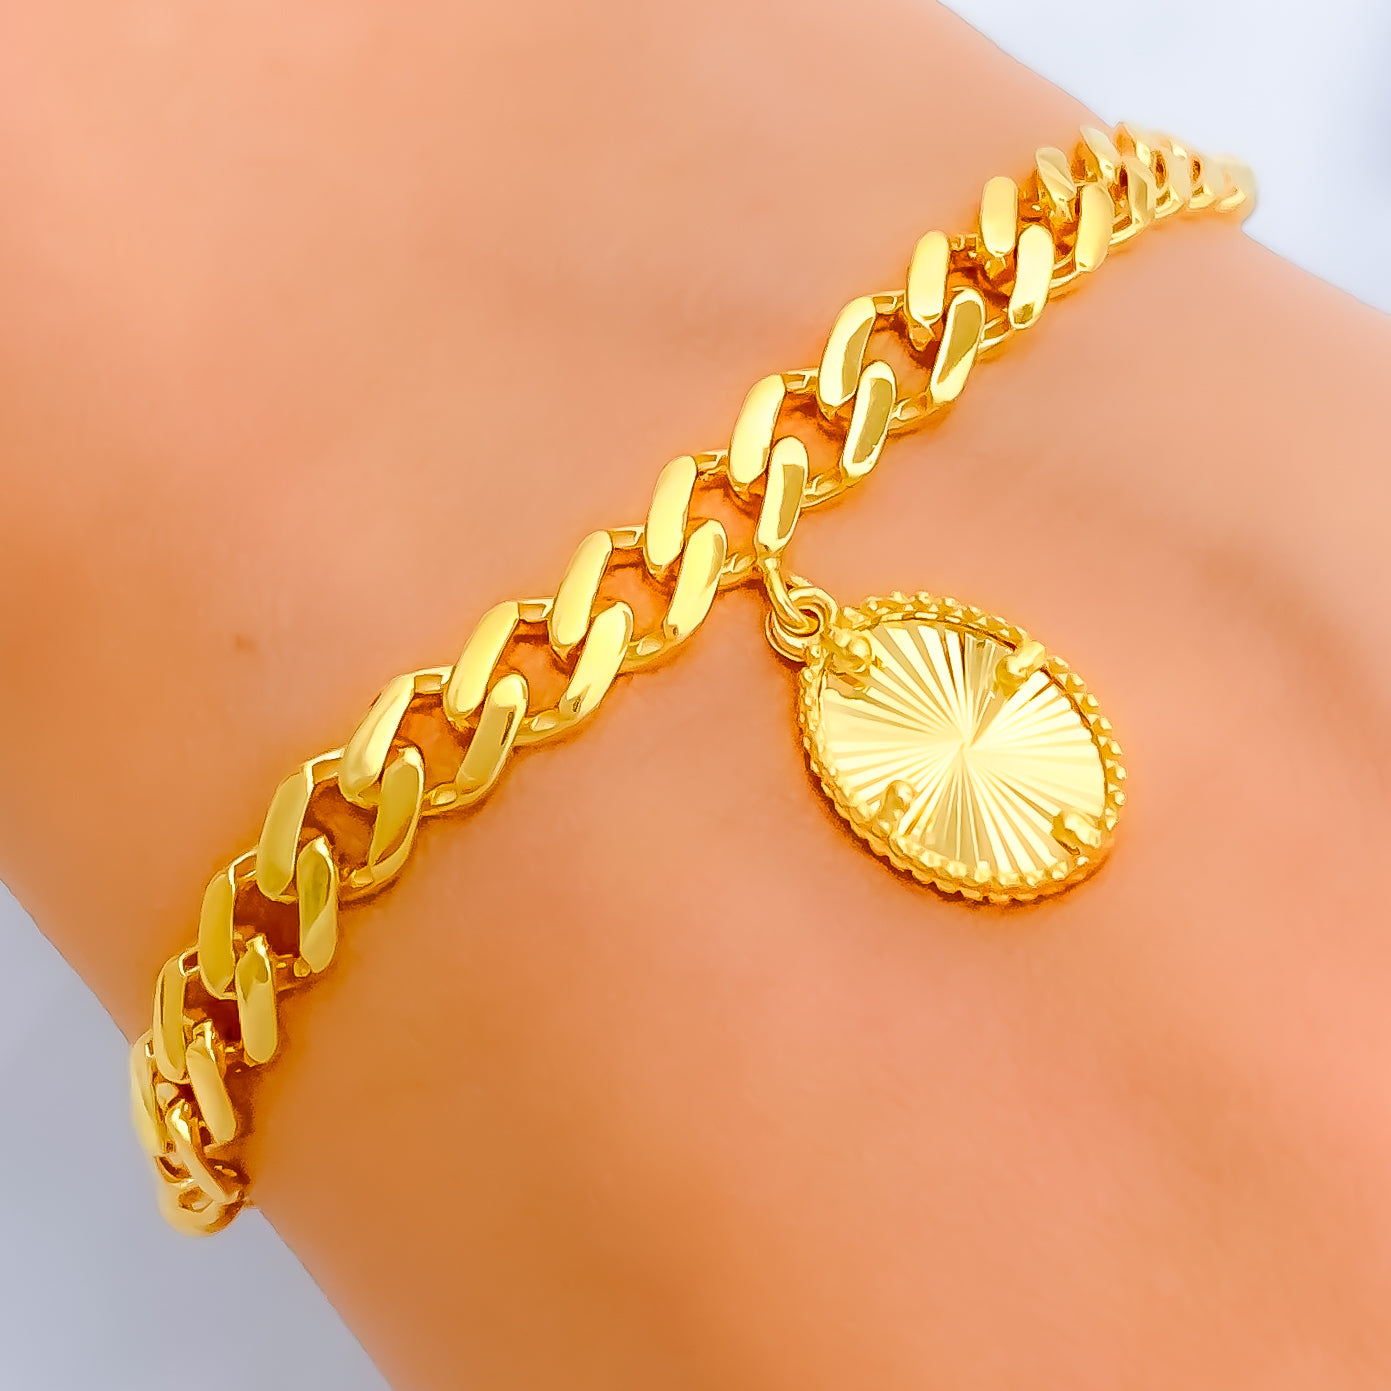 Shiny Coin 21k Gold Bracelet w/ Hanging Charm in 2023